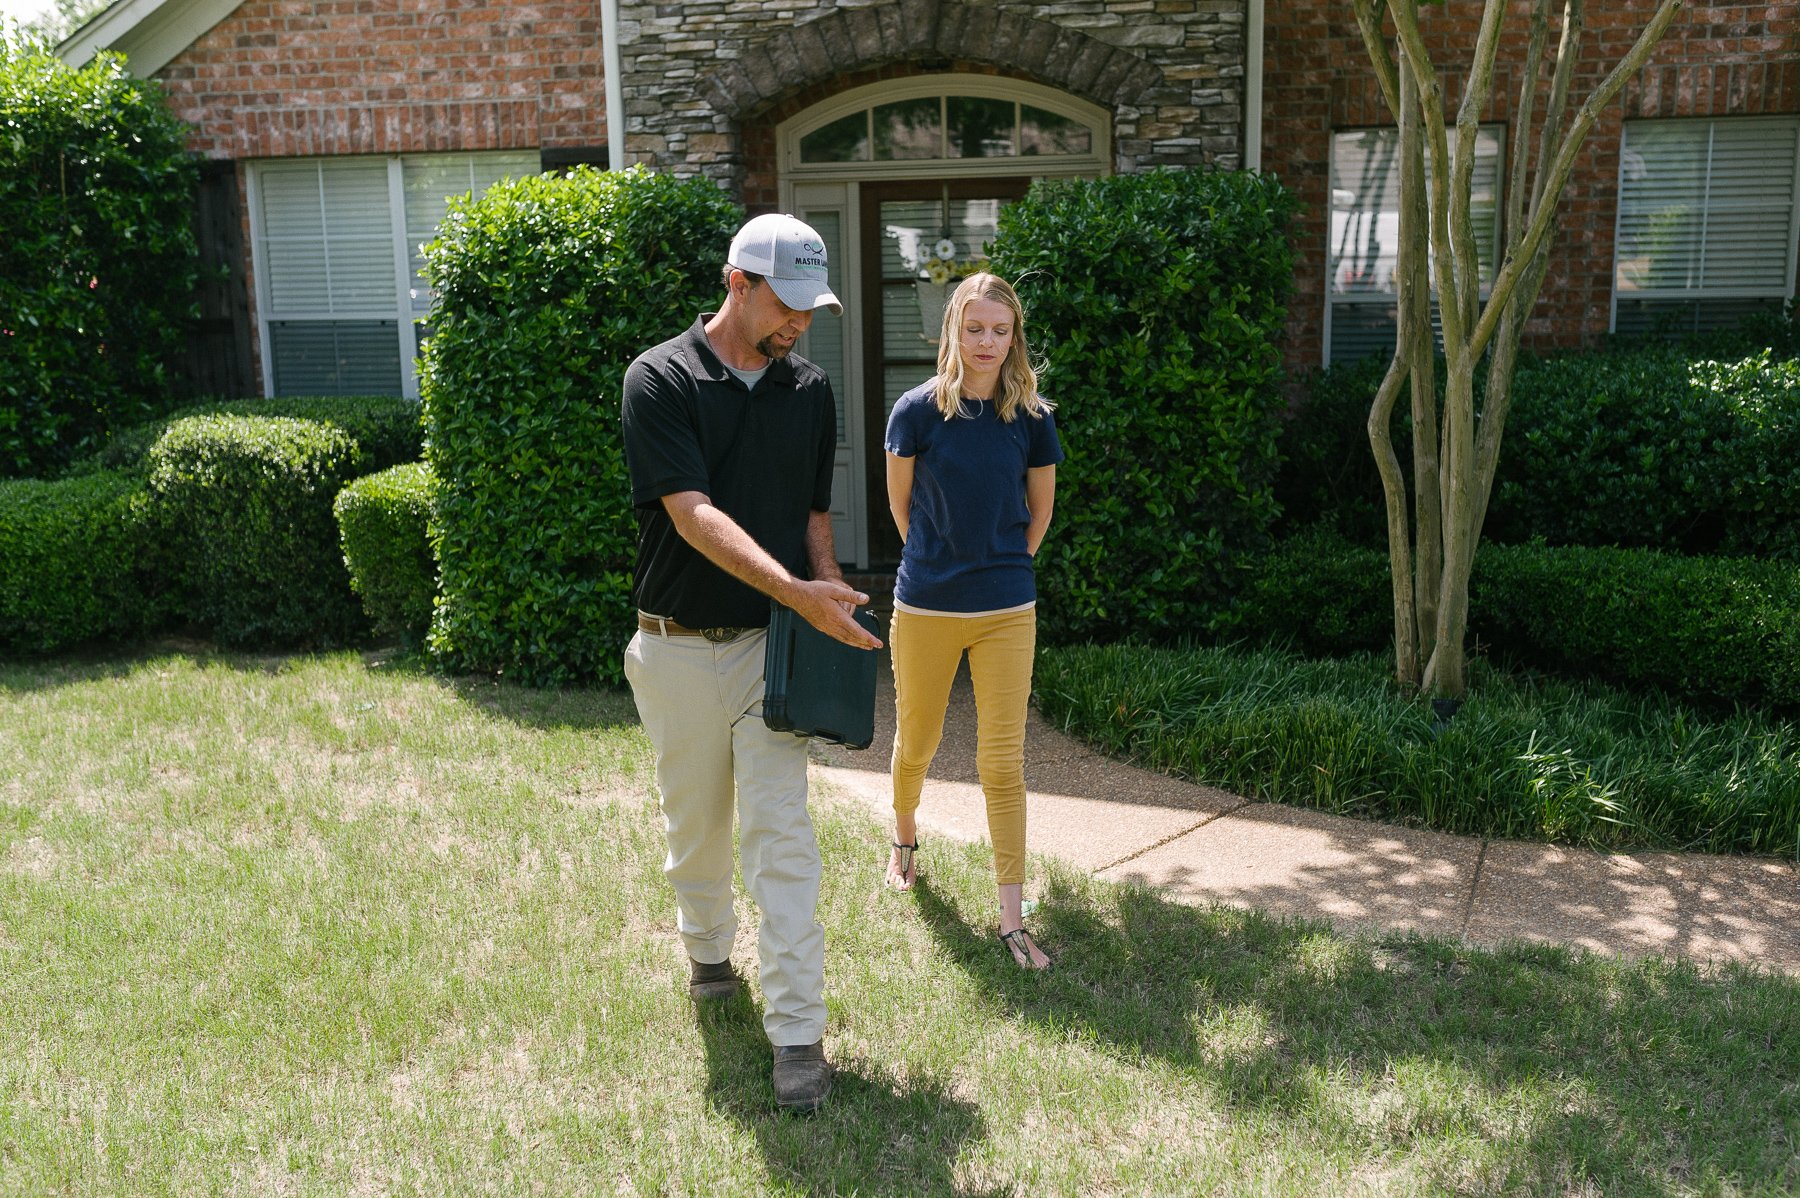 Master Lawn lawn care technician identifying lawn problems